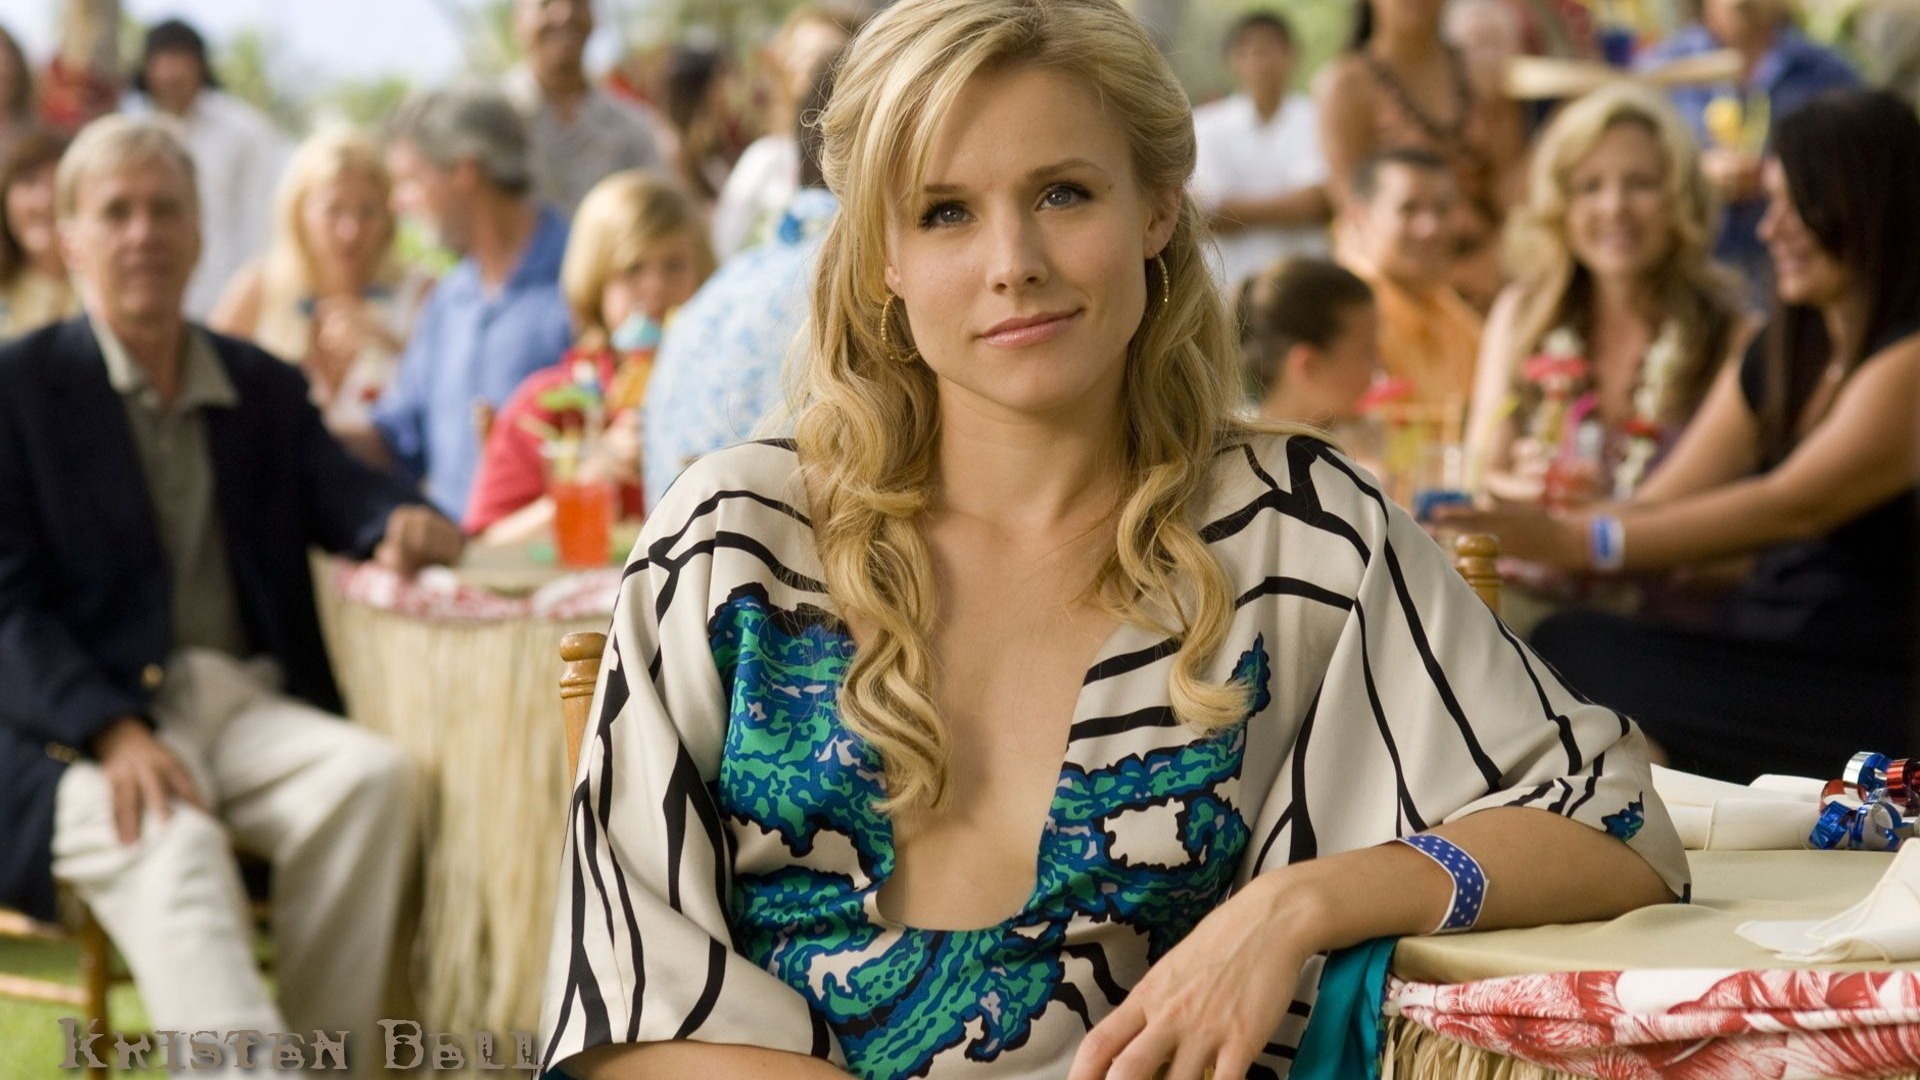 Kristen Bell #051 - 1920x1080 Wallpapers Pictures Photos Images